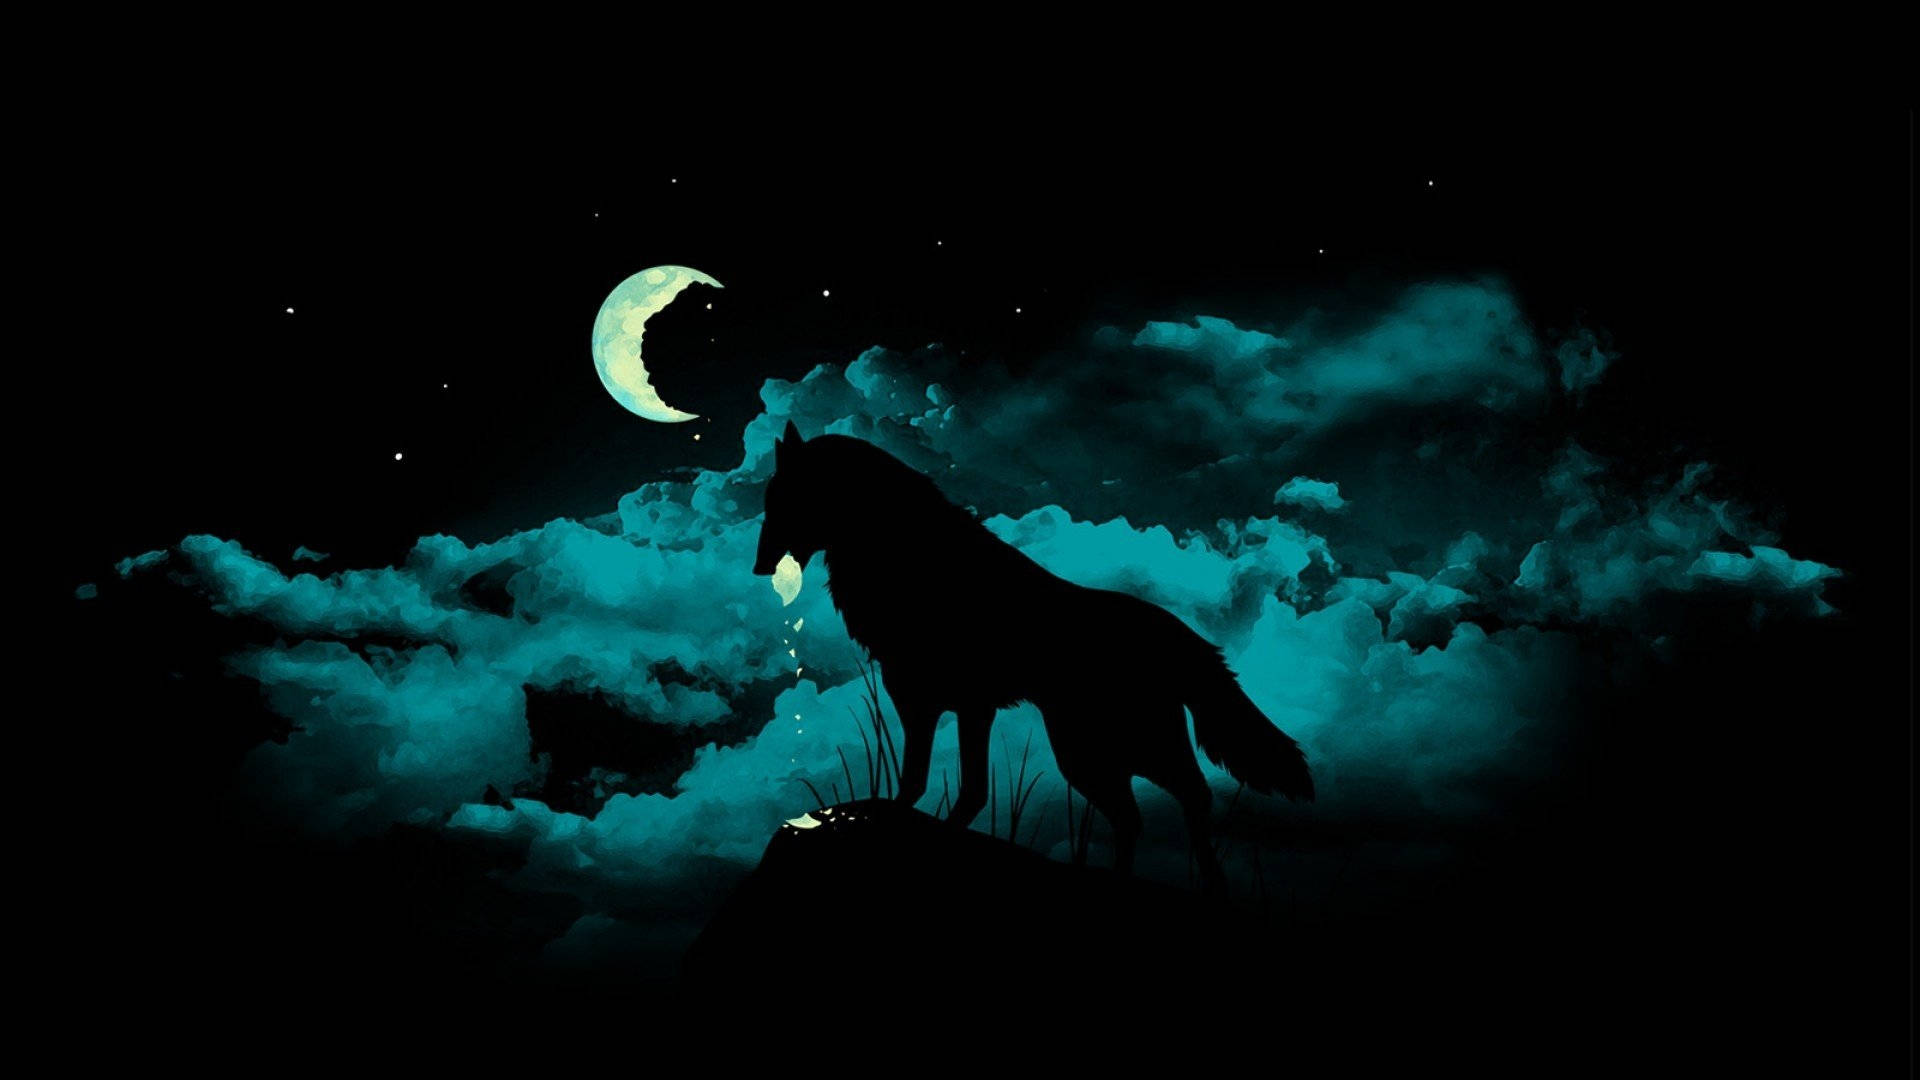 Caption: Dark Laptop With Enthralling Wolf Wallpaper At Night Background